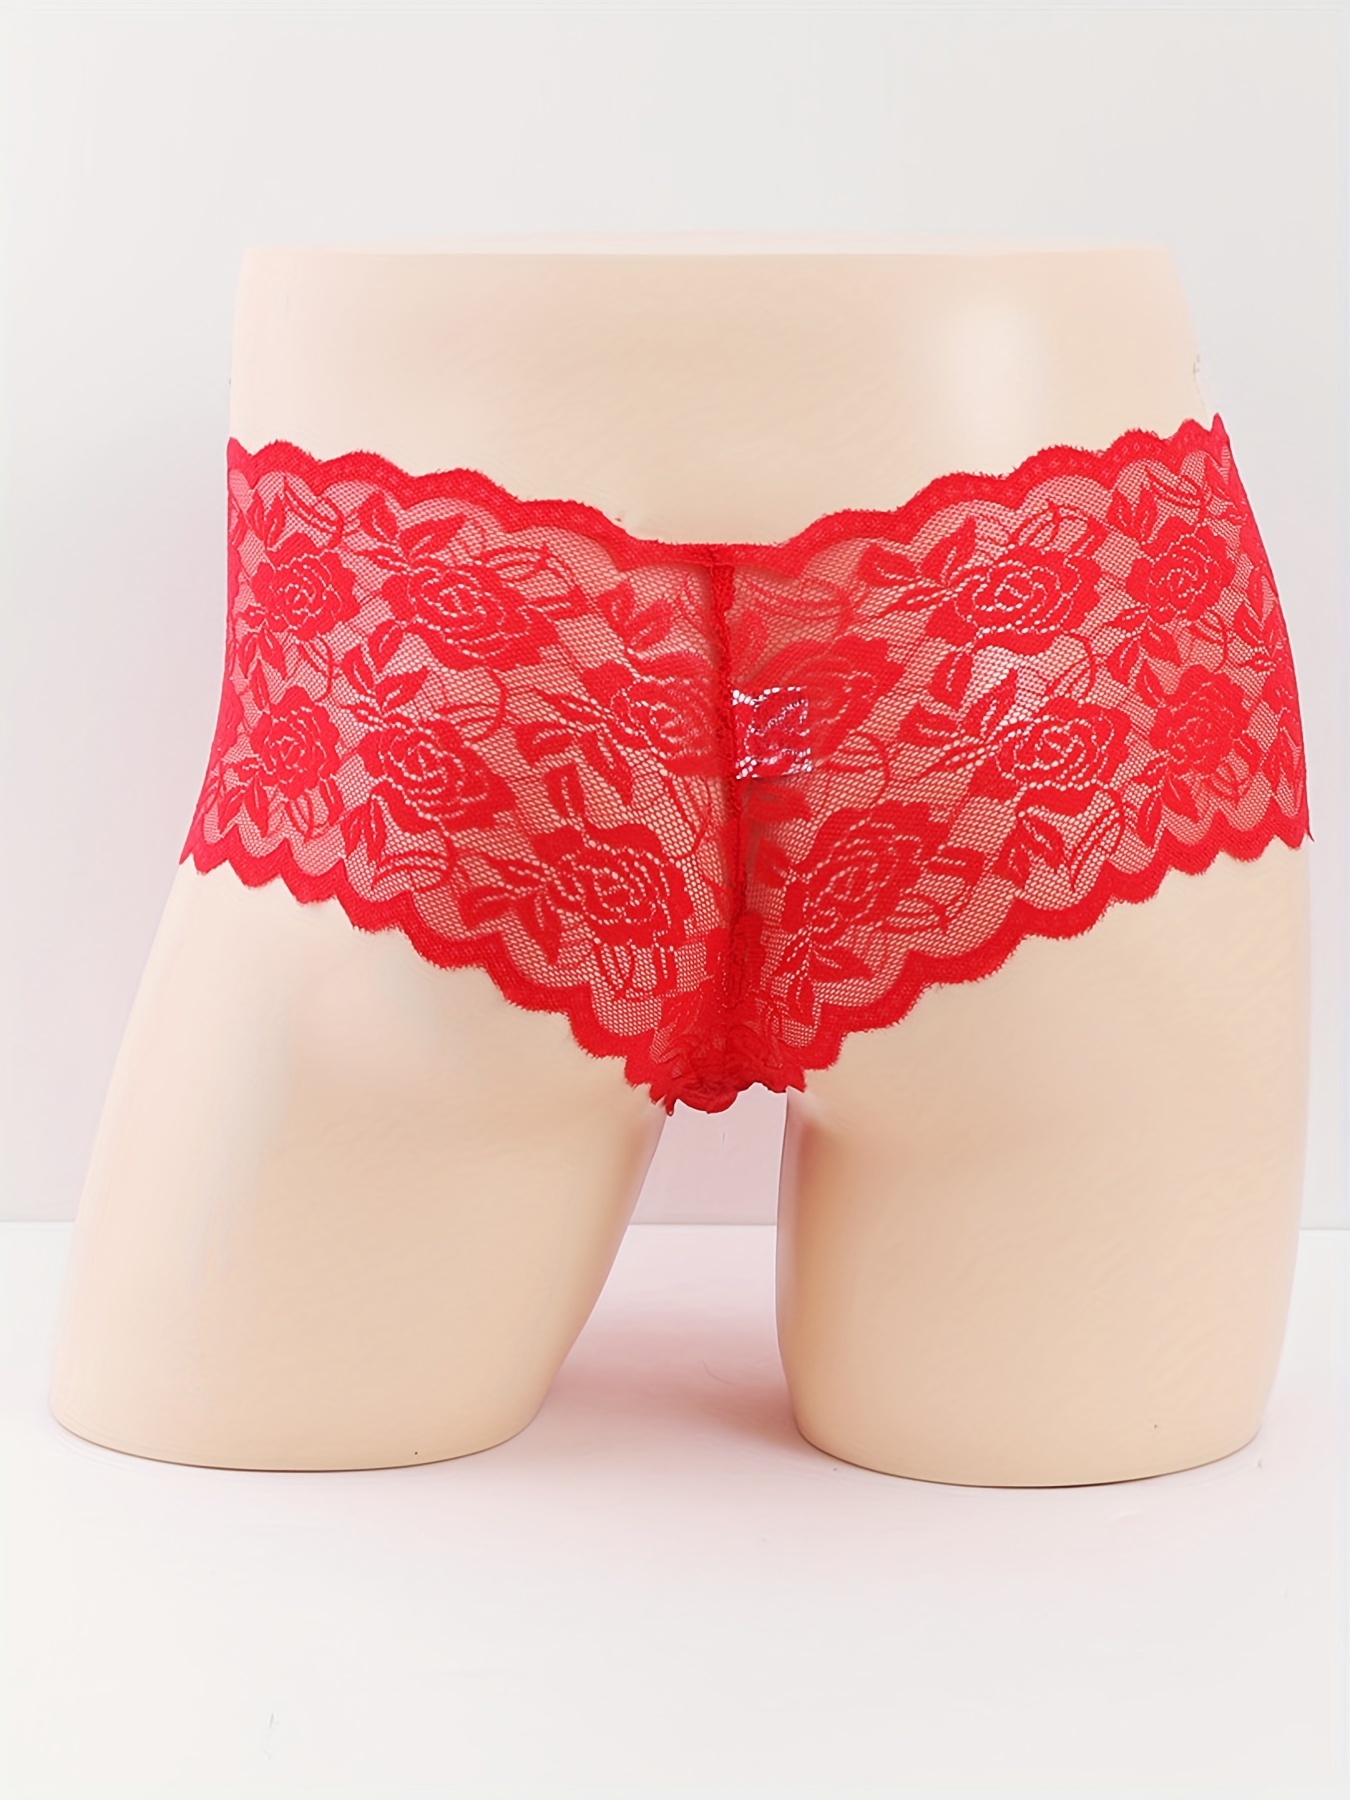 New Year's Pure Cotton Red Underpants Men u Convex Sexy